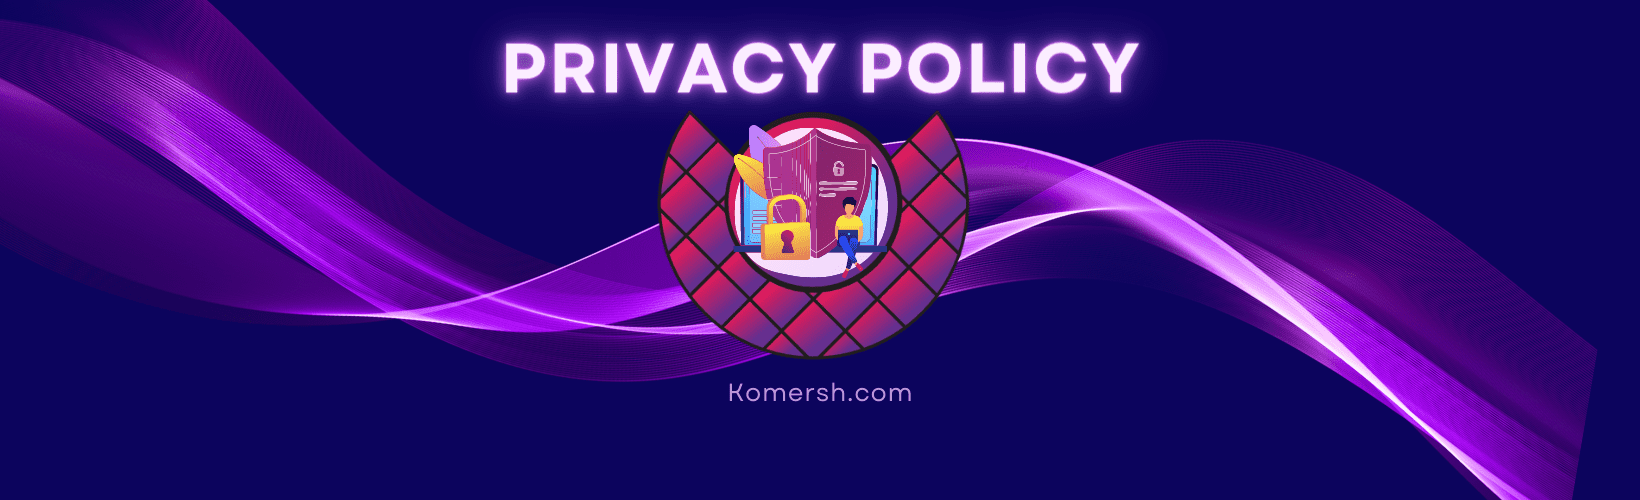 Privacy Policy (1)